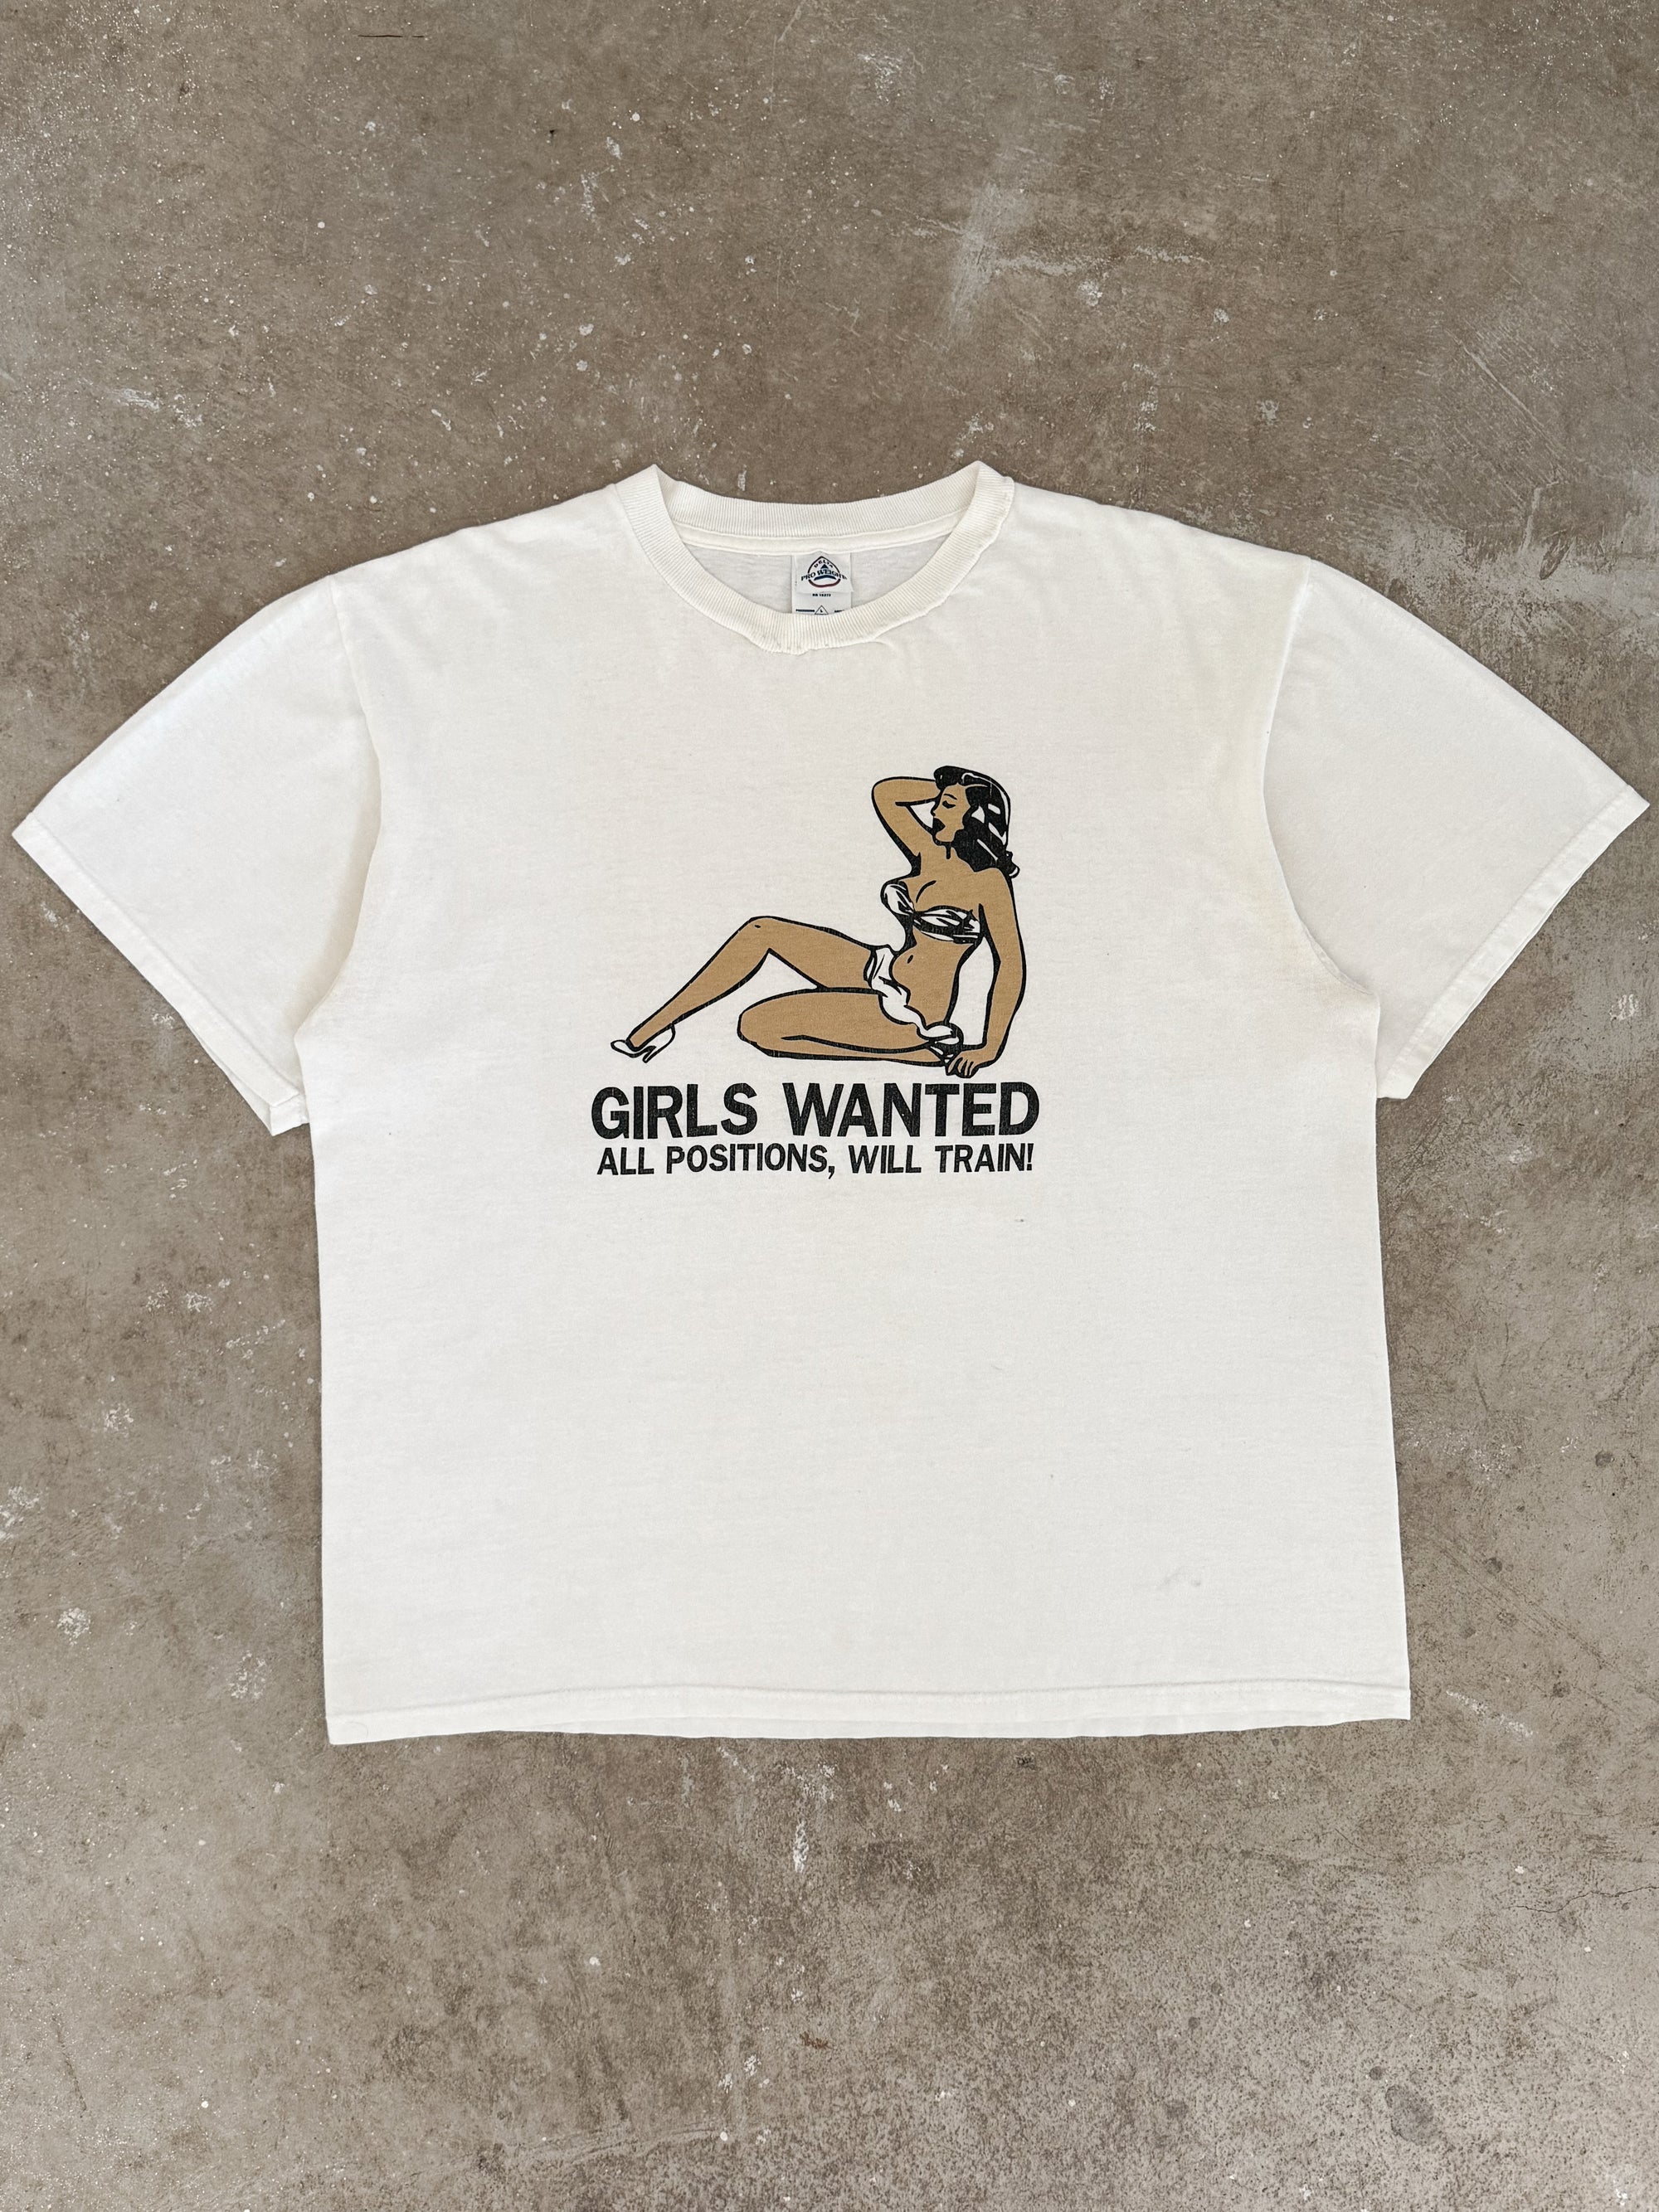 2000s "Girls Wanted" Tee (L)